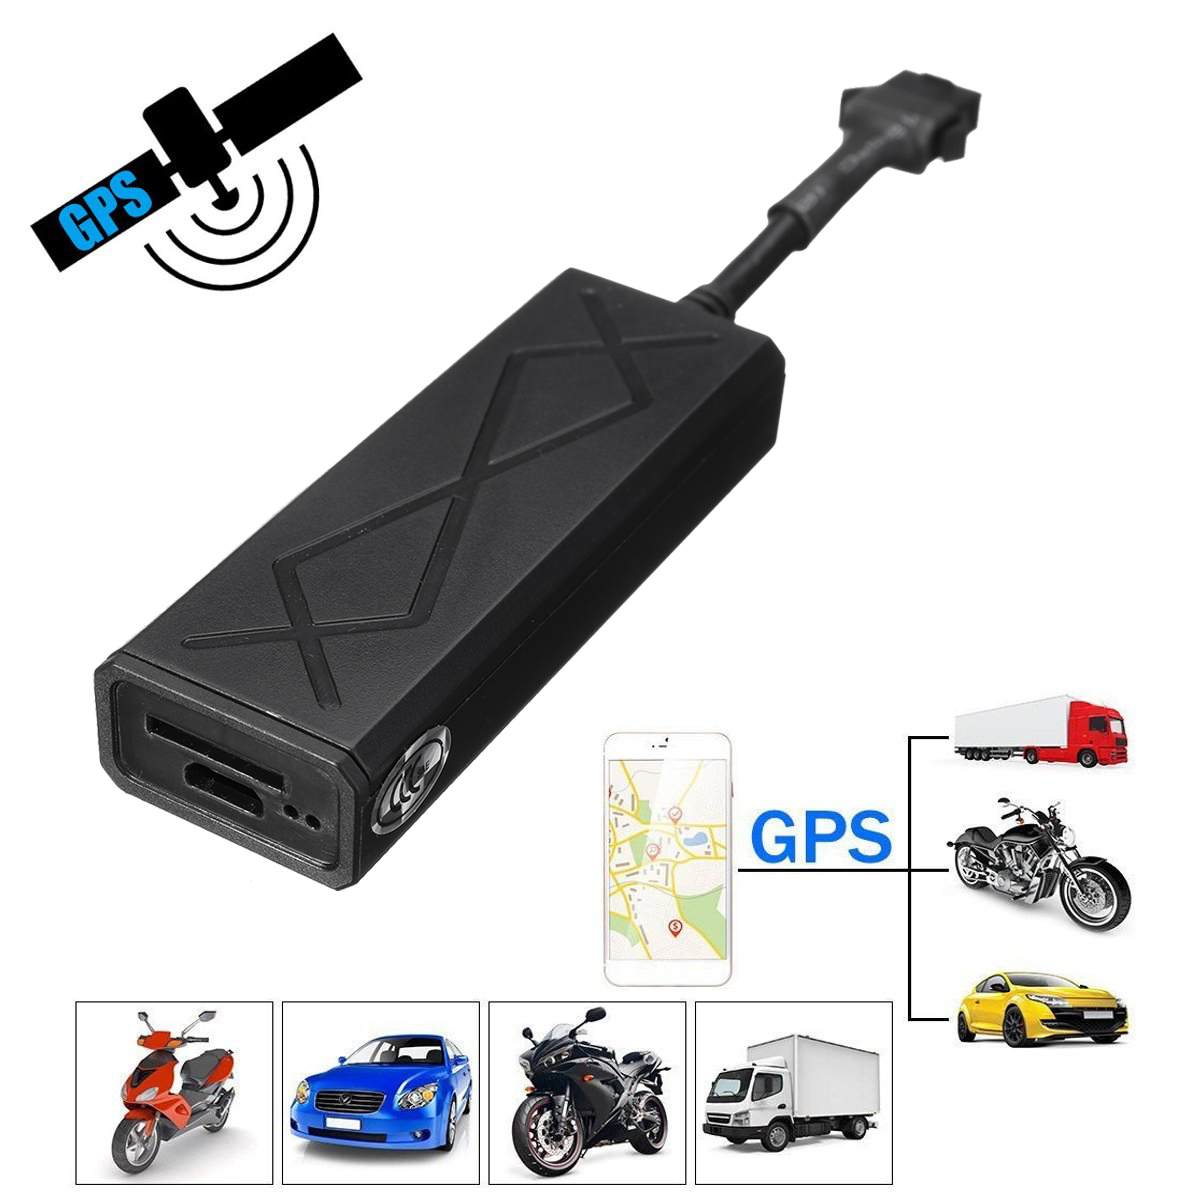 Car-GSM-GPS-Real-Time-Position-Tracker-Locator-LBS-WiFi-Vehicle-Tracking-Device-1273218